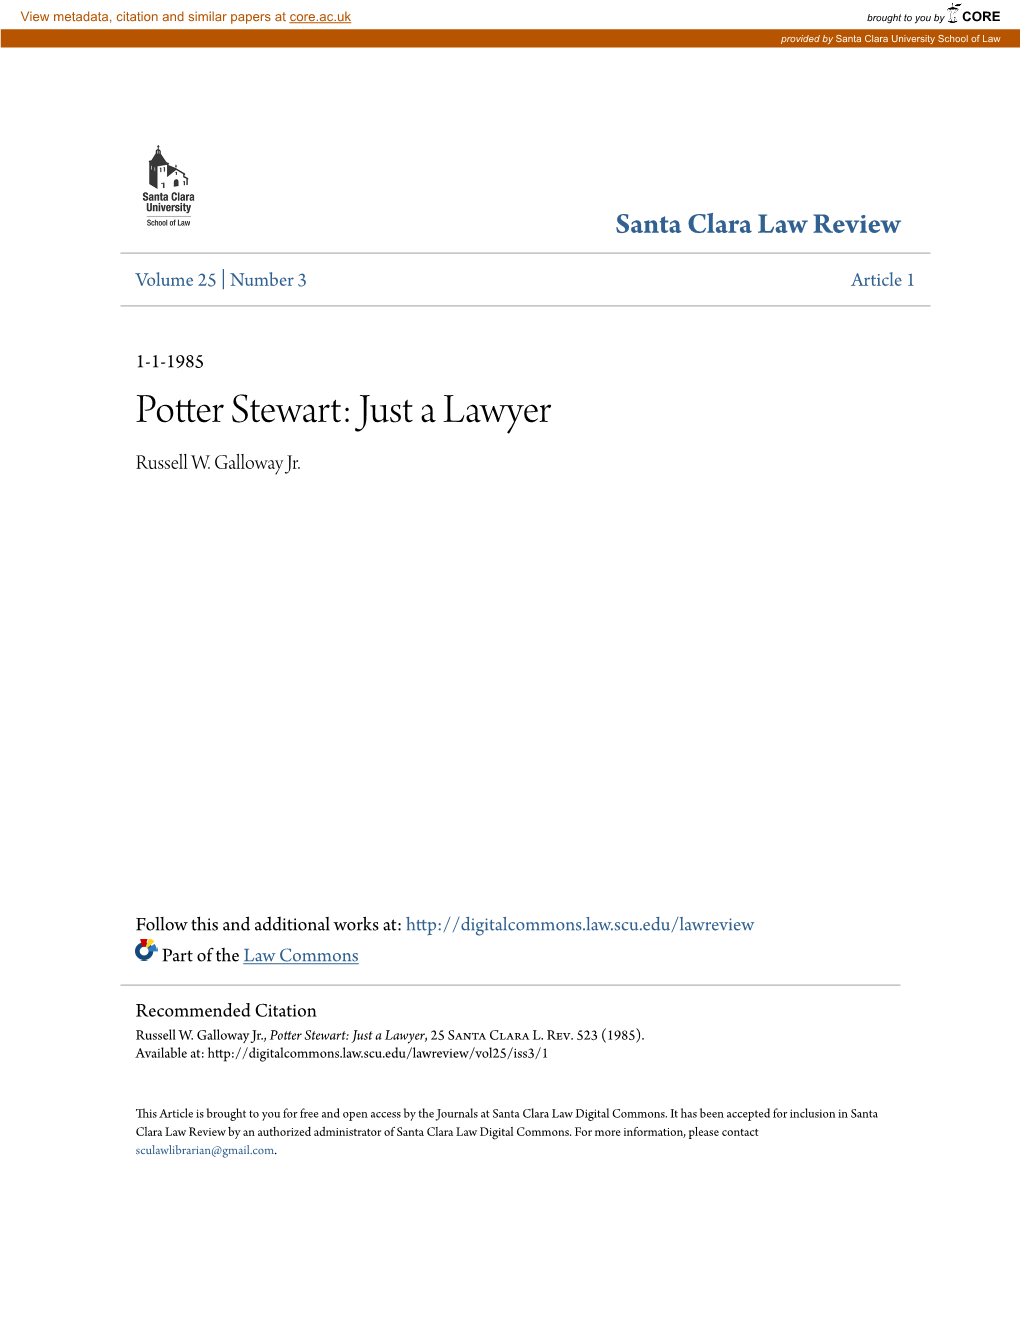 Potter Stewart: Just a Lawyer Russell W